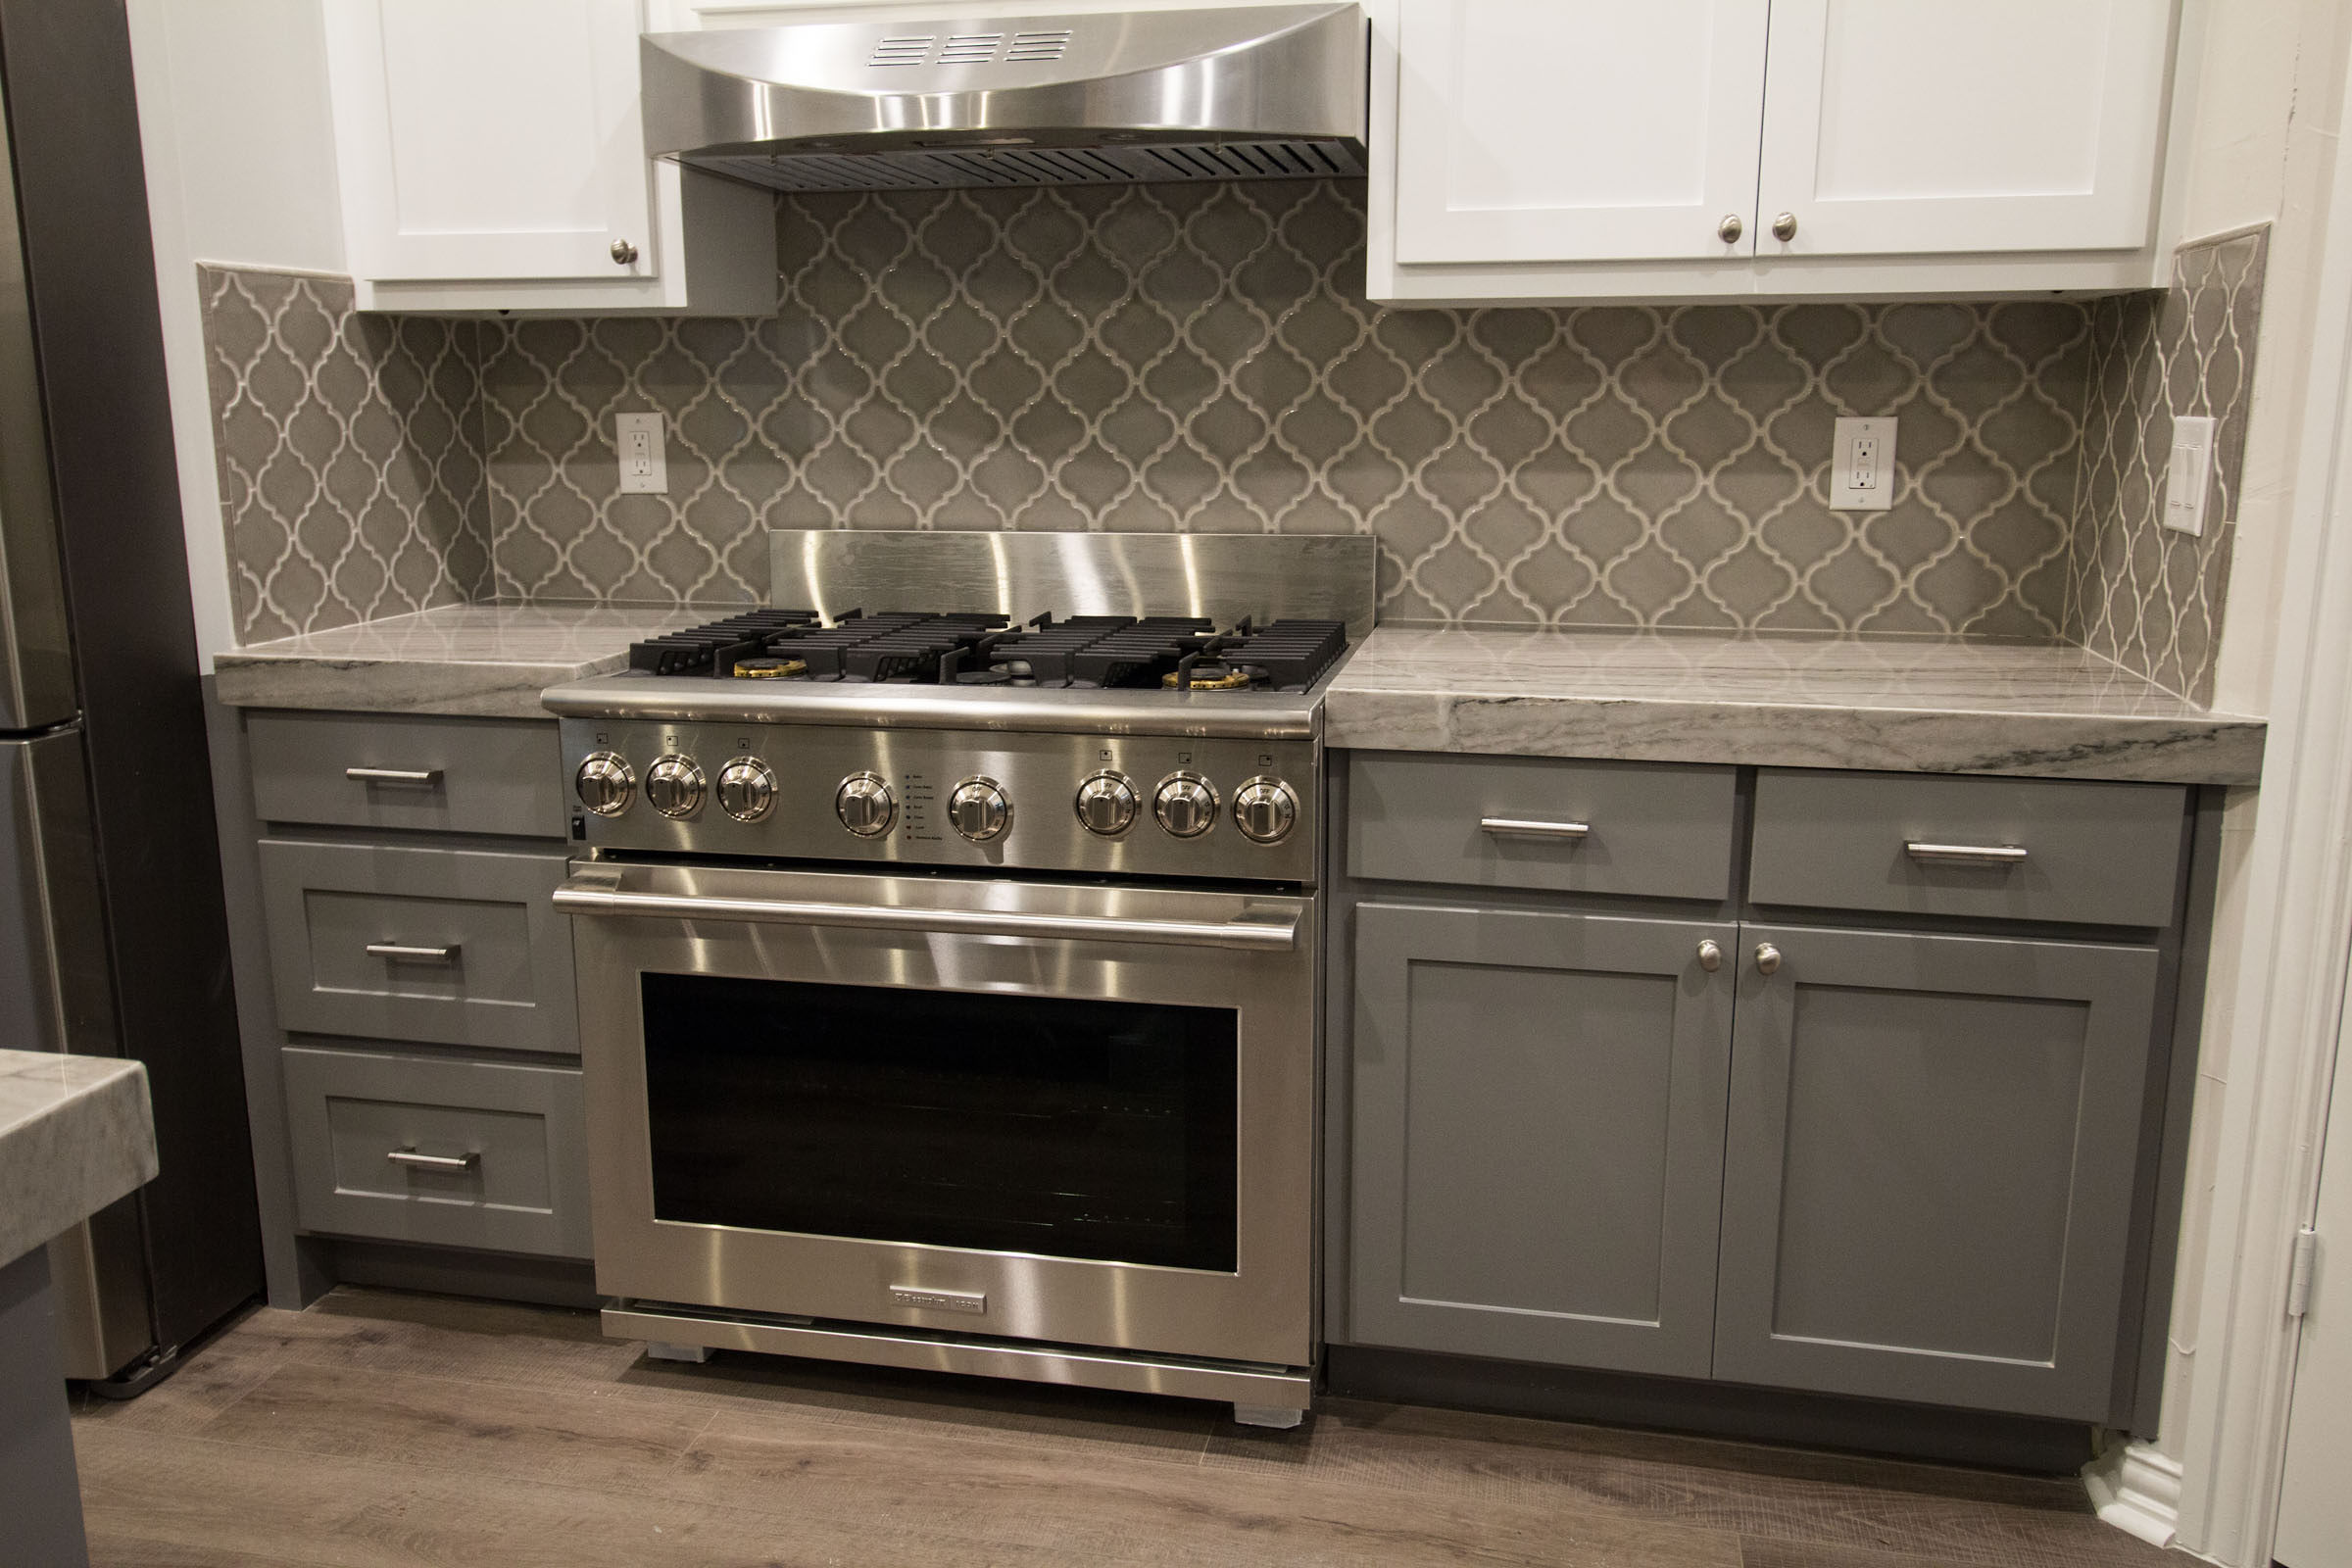 Contemporary kitchen remodel with industrial stainless steel gas cooking range, arabesque tile, grey shaker cabinets, white uppers, grey granite